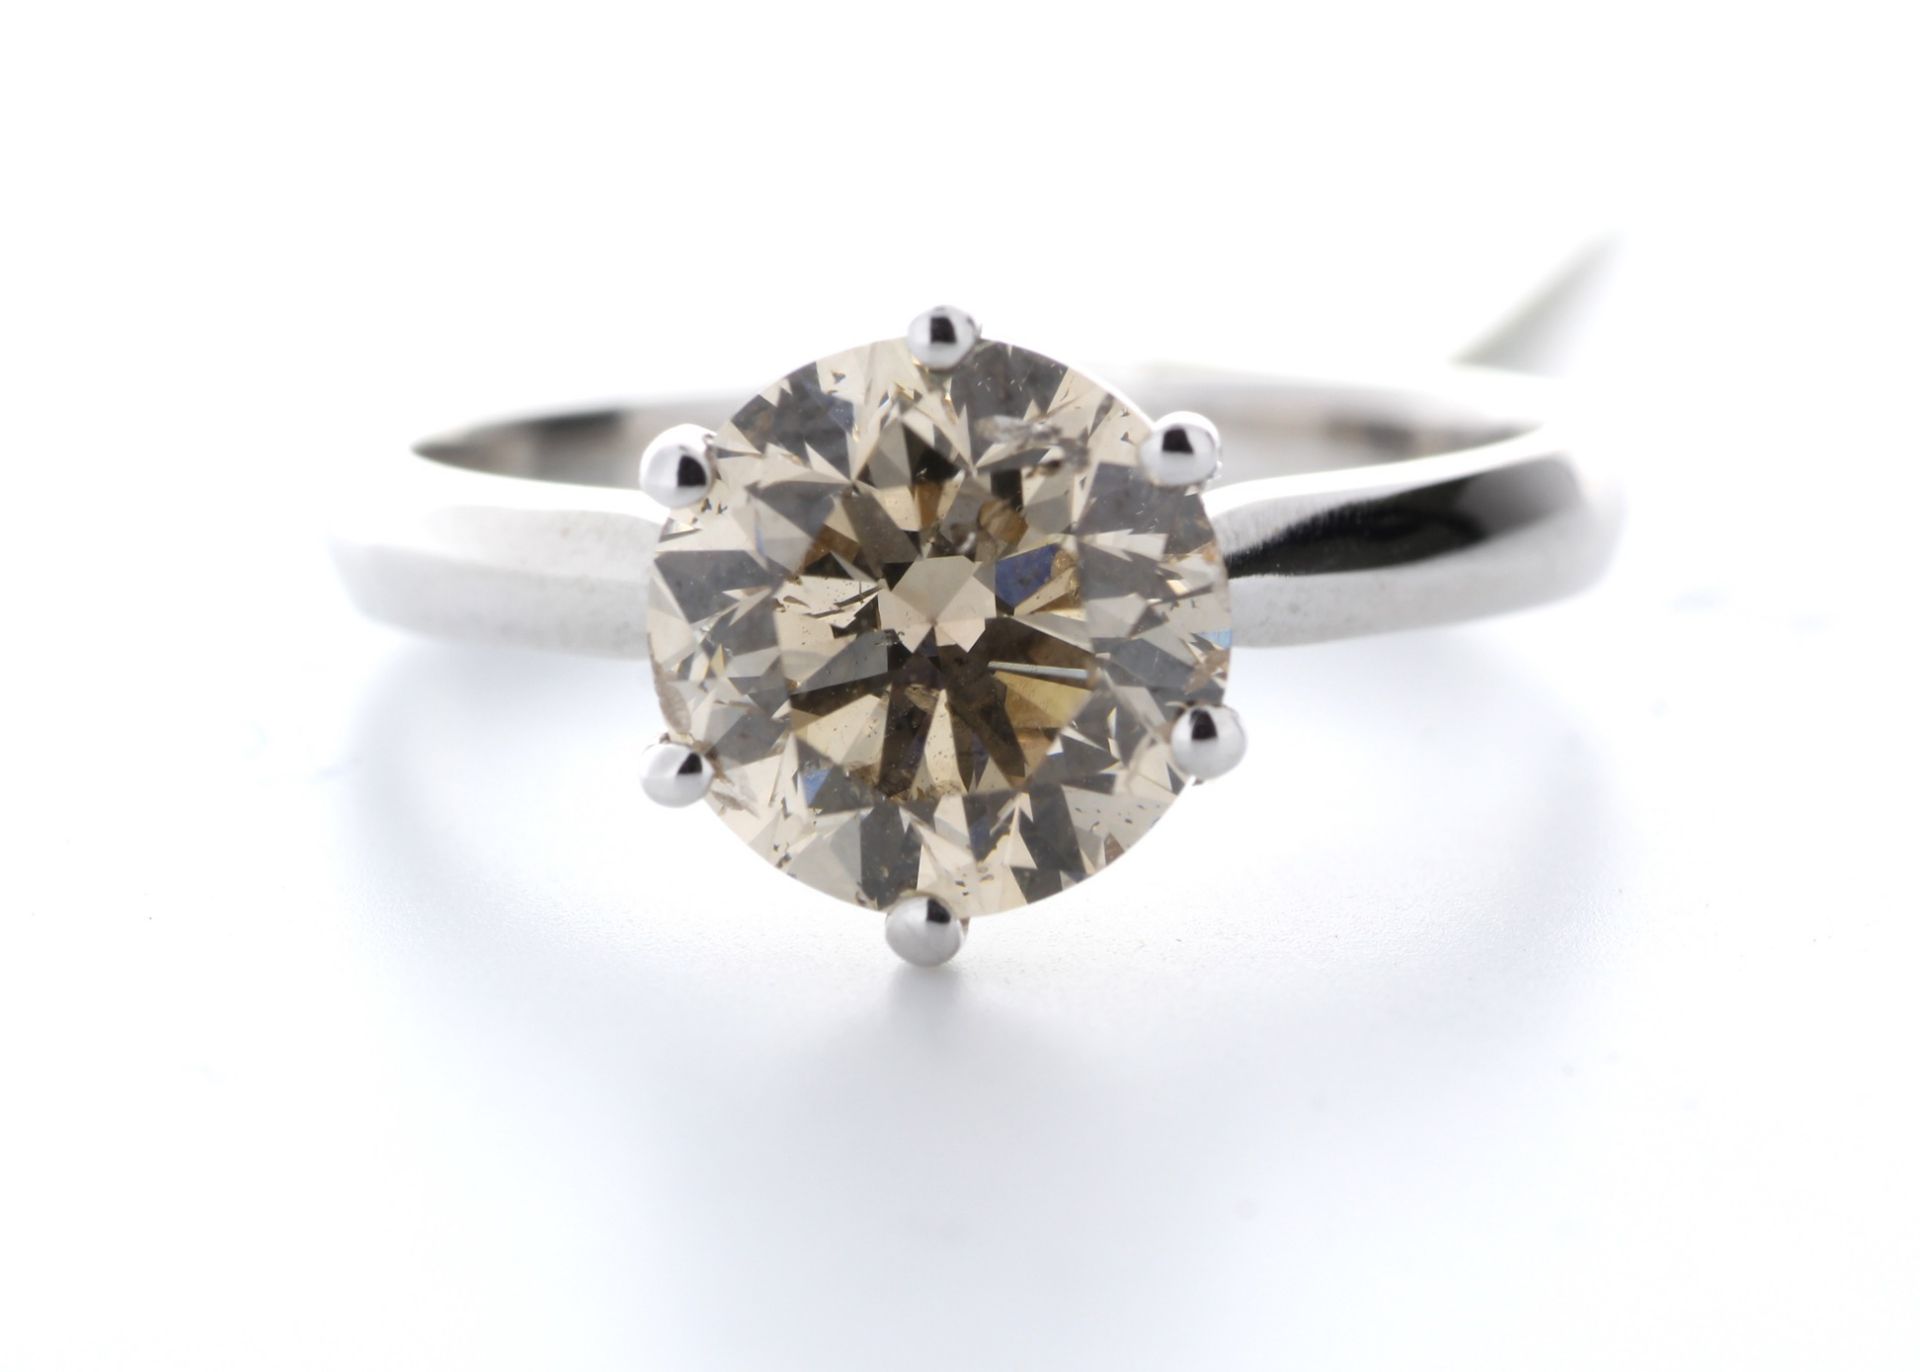 Valued by GIE £79,955.00 - 18ct White Gold Single Stone Claw Set Diamond Ring 2.58 Carats - 3103132,